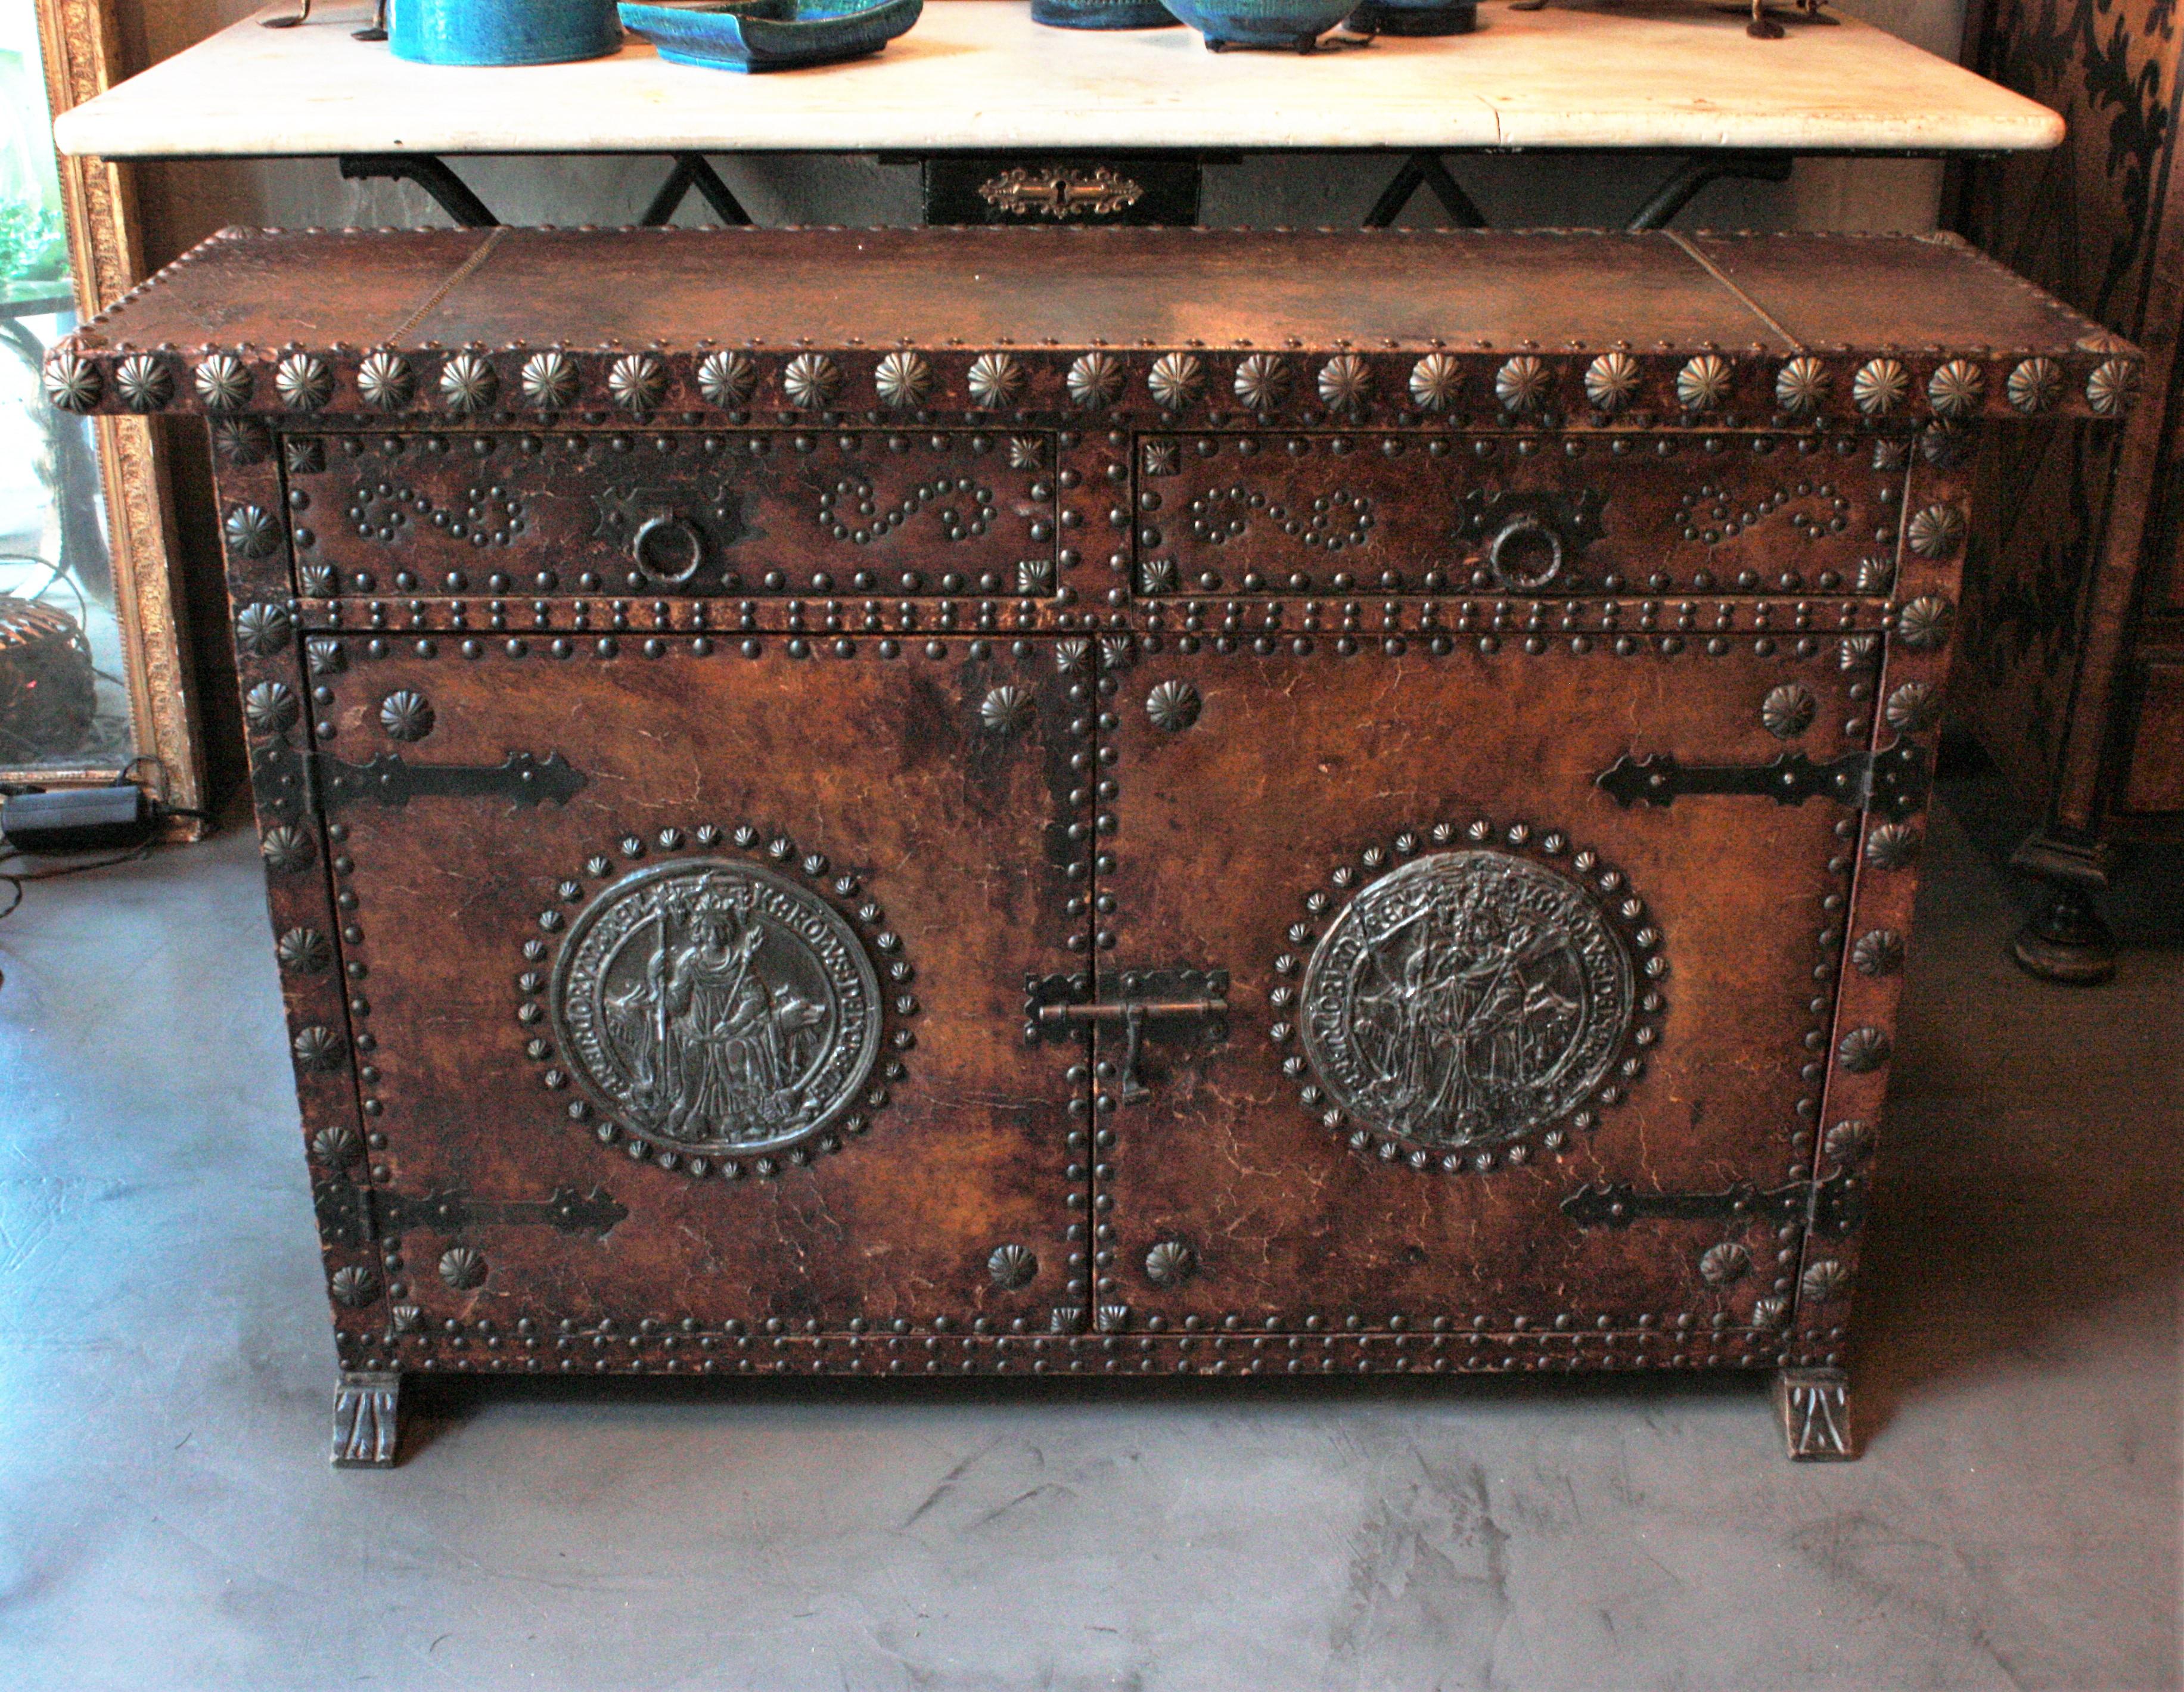 Terrific traditional leather and wood cabinet or sideboard with studwork and decorative panels, Spain, 1940s.
This handsome cabinet has two drawers over two doors. It is upholstered in brown leather which is decorated with large silvered studs and